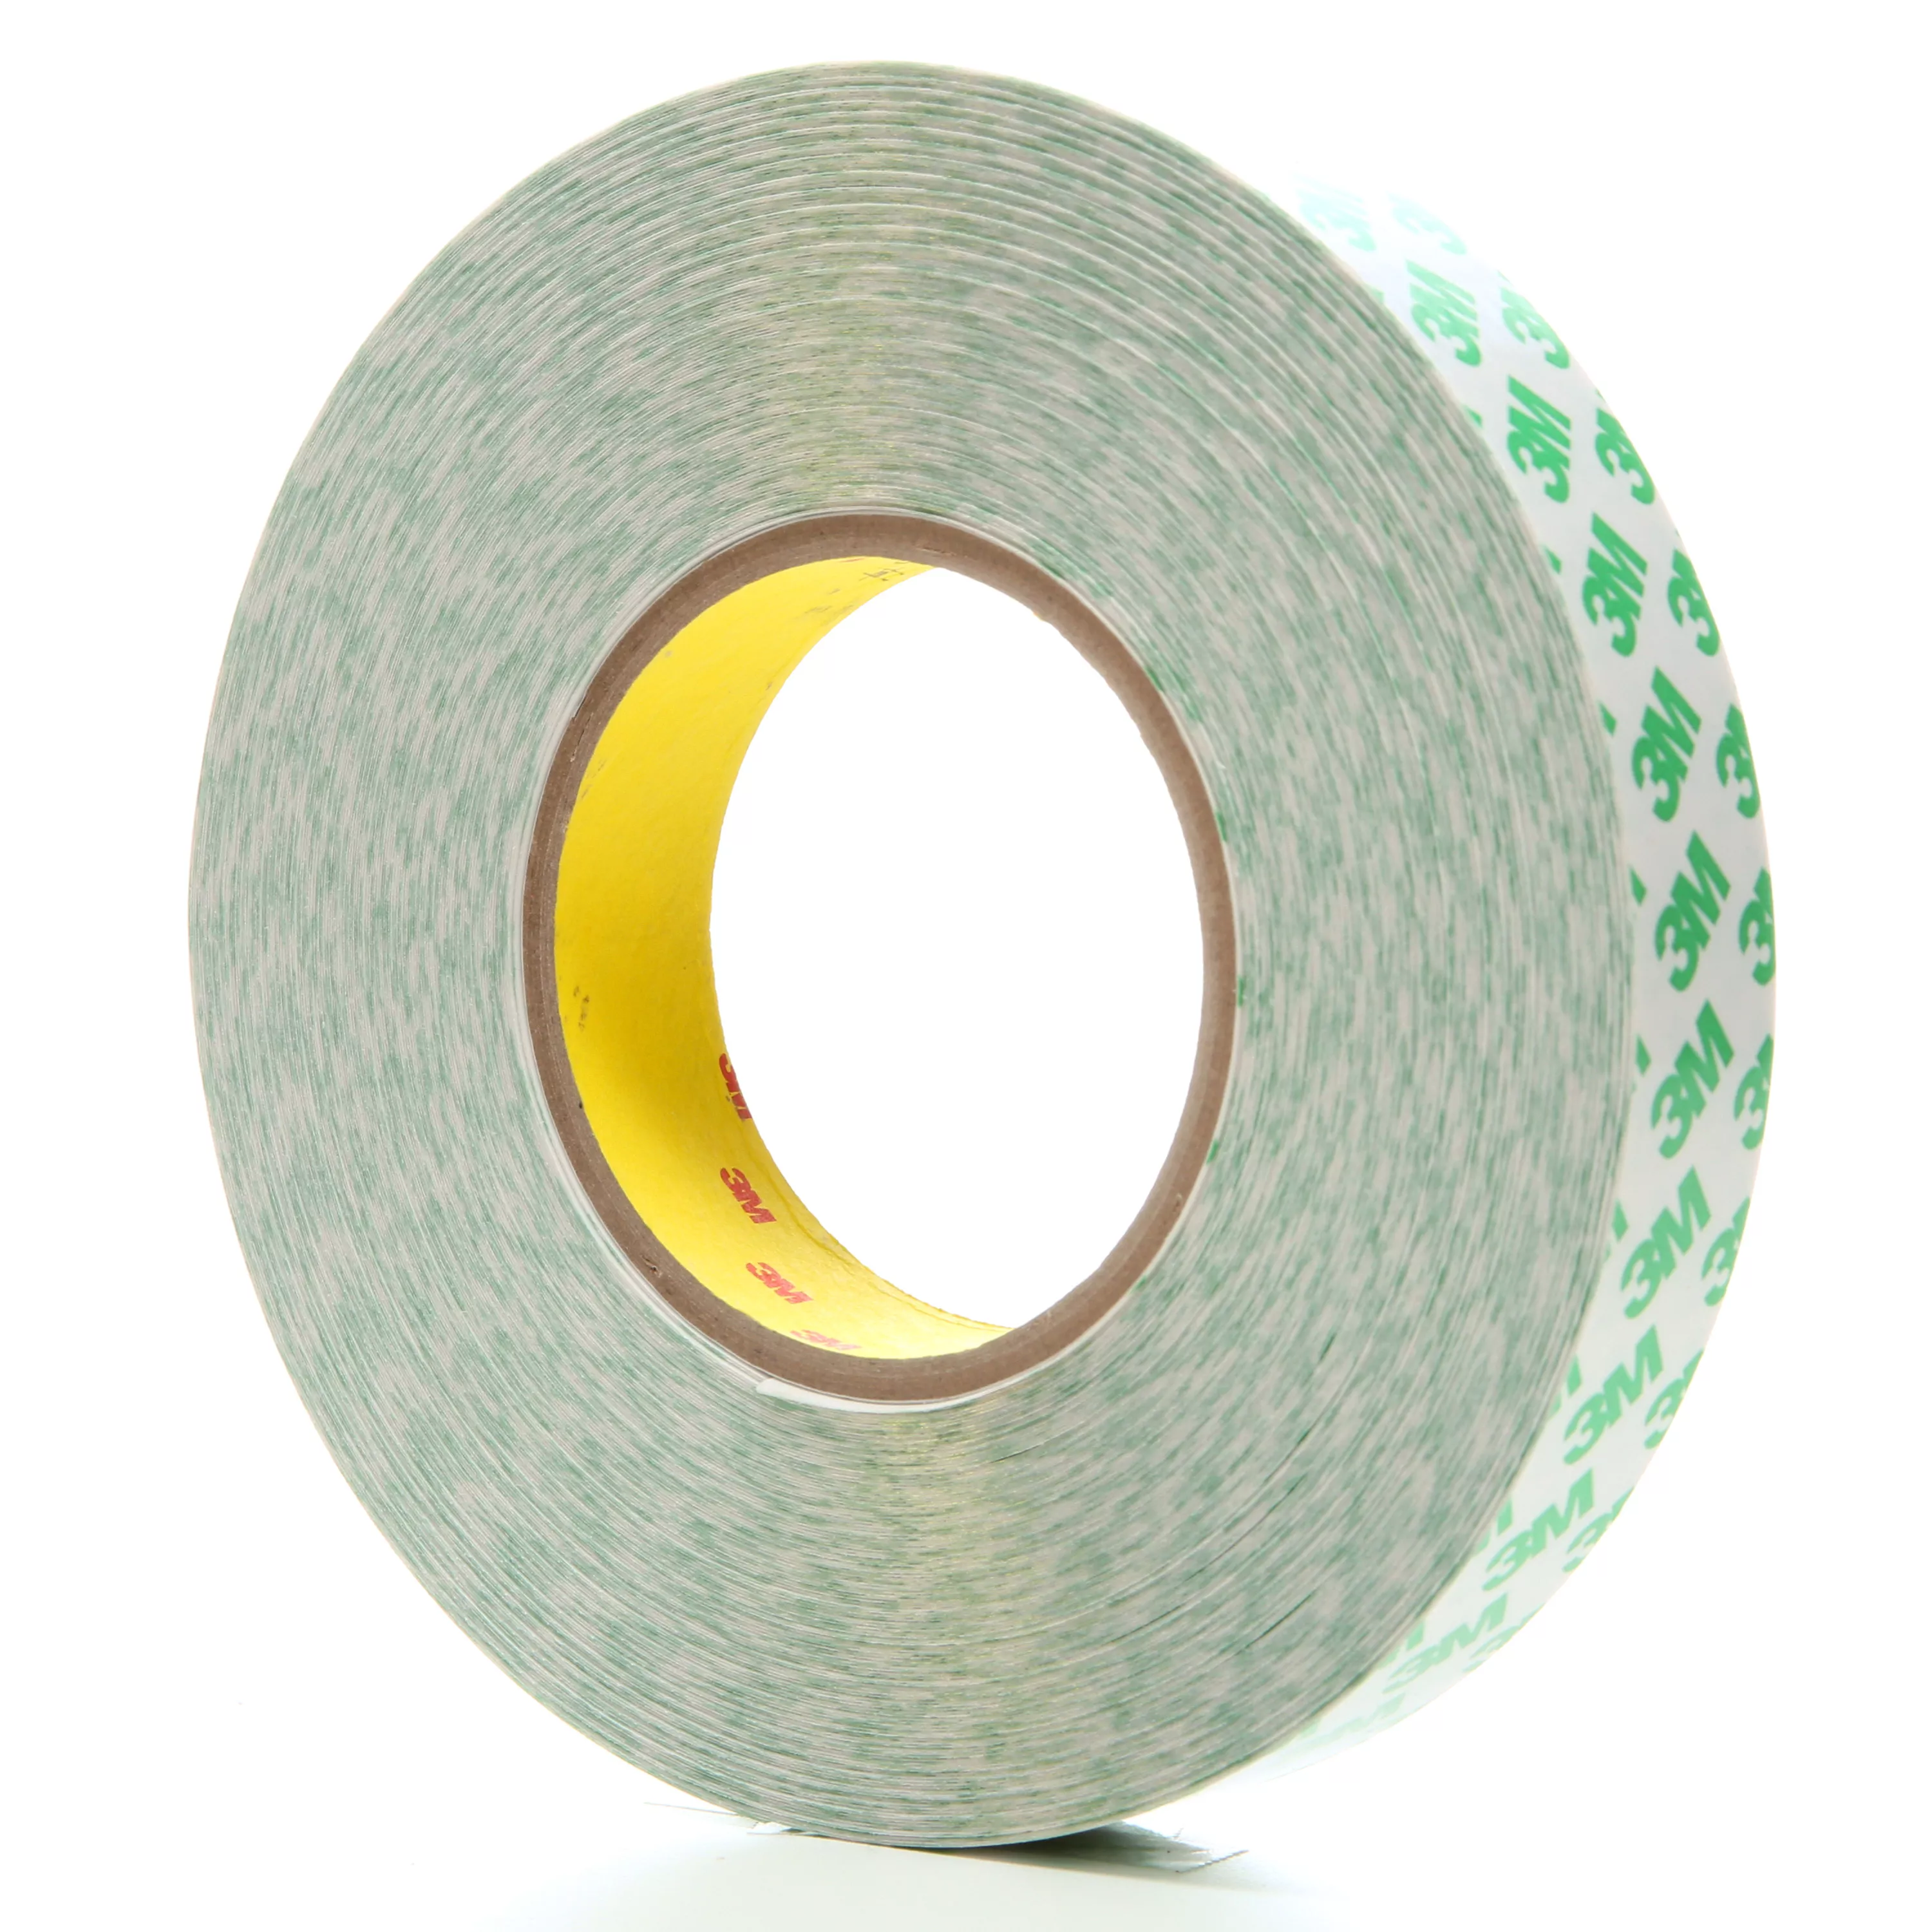 3M™ High Performance Double Coated Tape 9087, White, 1 in x 55 yd, 10.1
mil, 18 Roll/Case